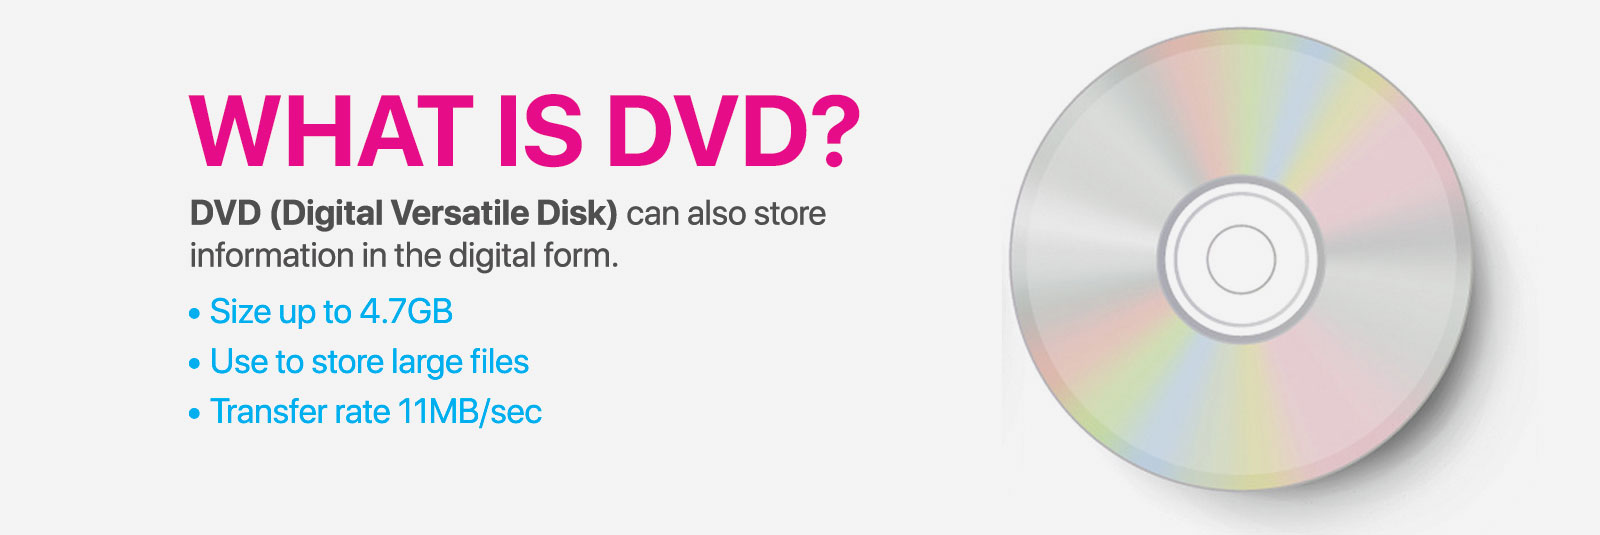 What is DVD? DVD (Digital Versatile Disk) can also store information in the digital form